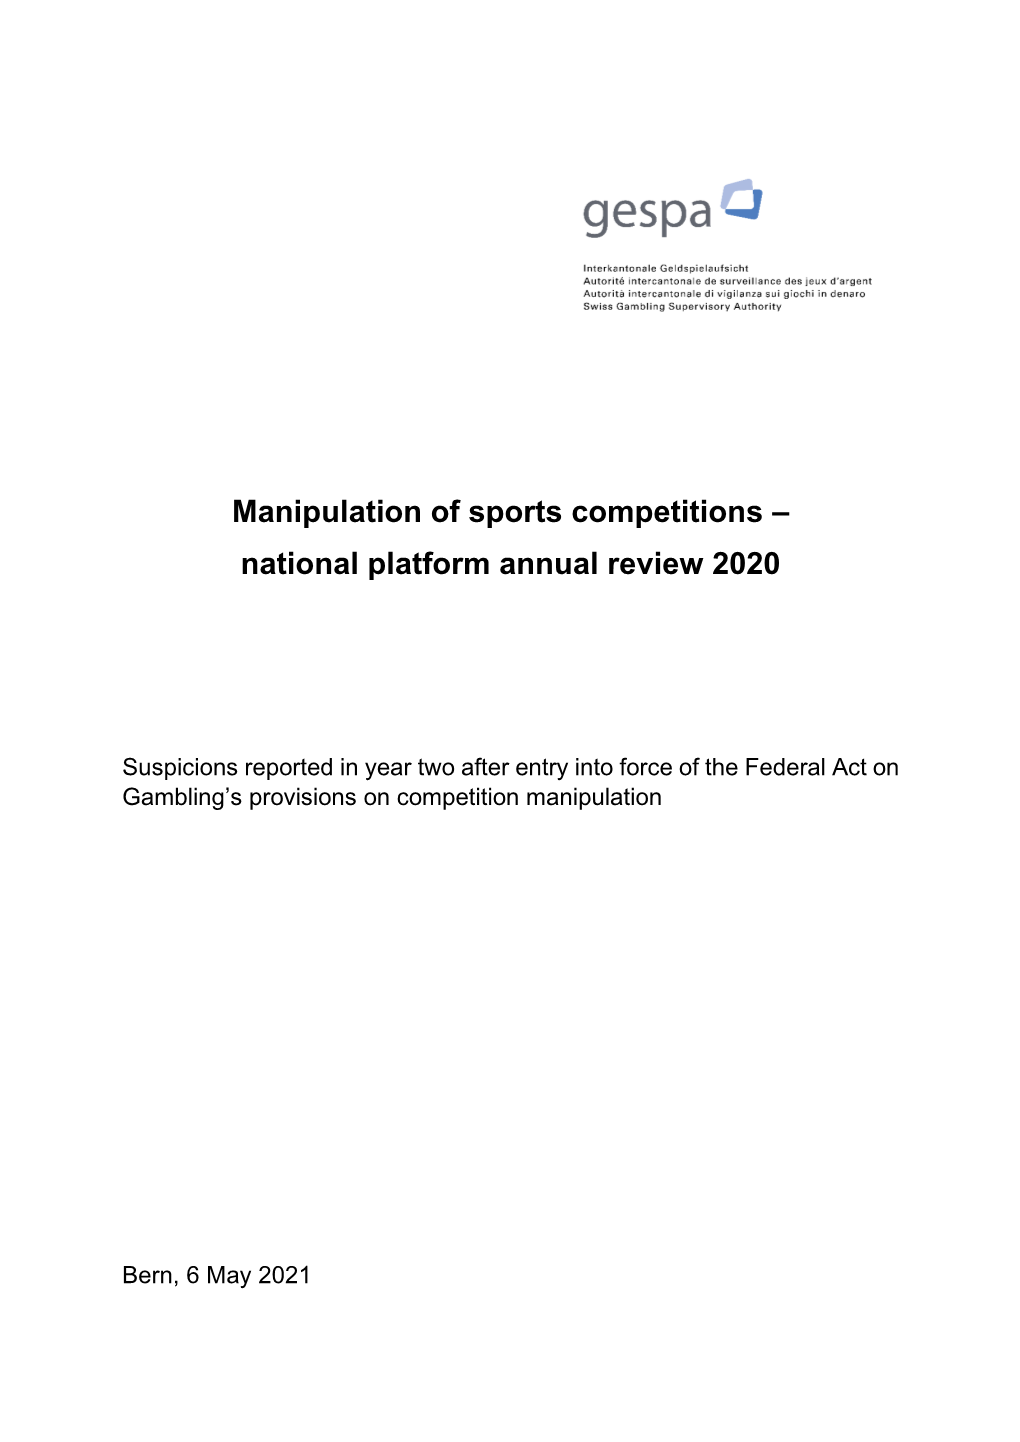 Manipulation of Sports Competitions – National Platform Annual Review 2020